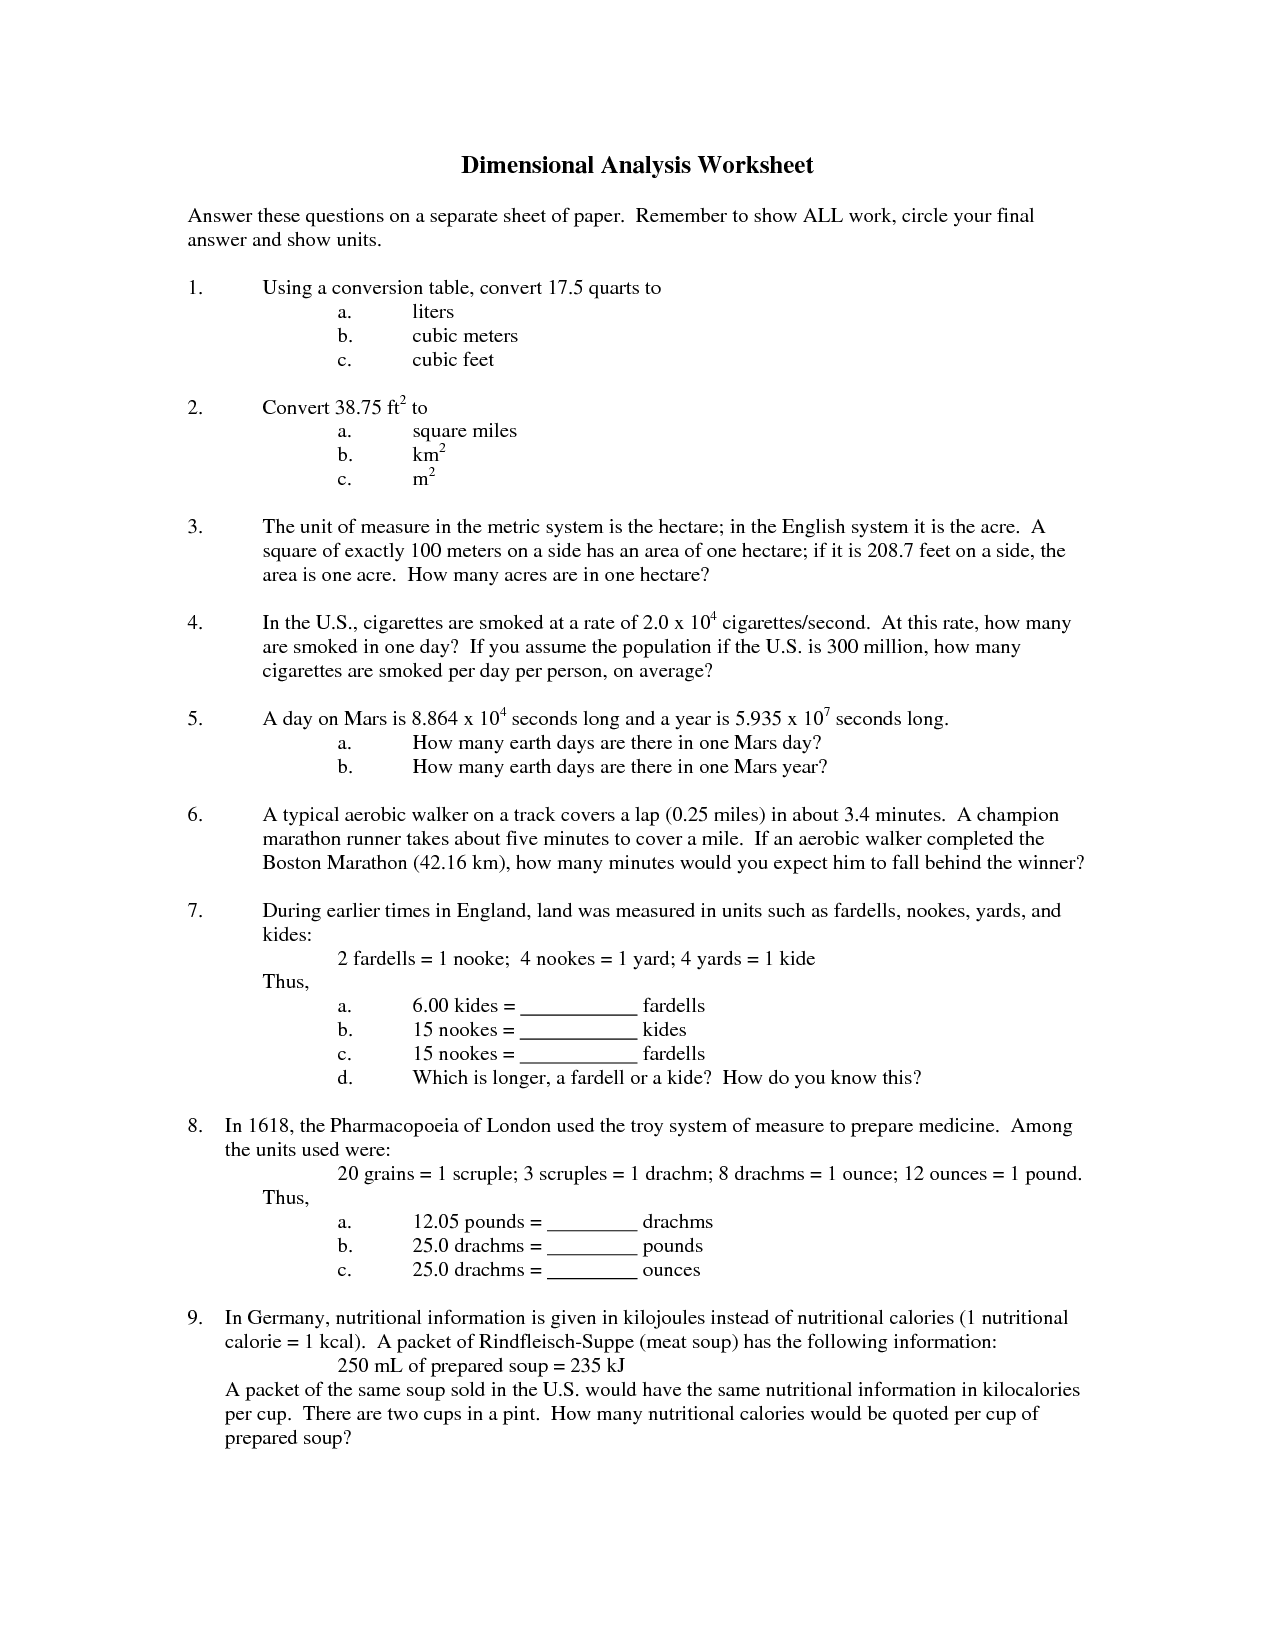 Dimensional Analysis Worksheet Answers Questions Image